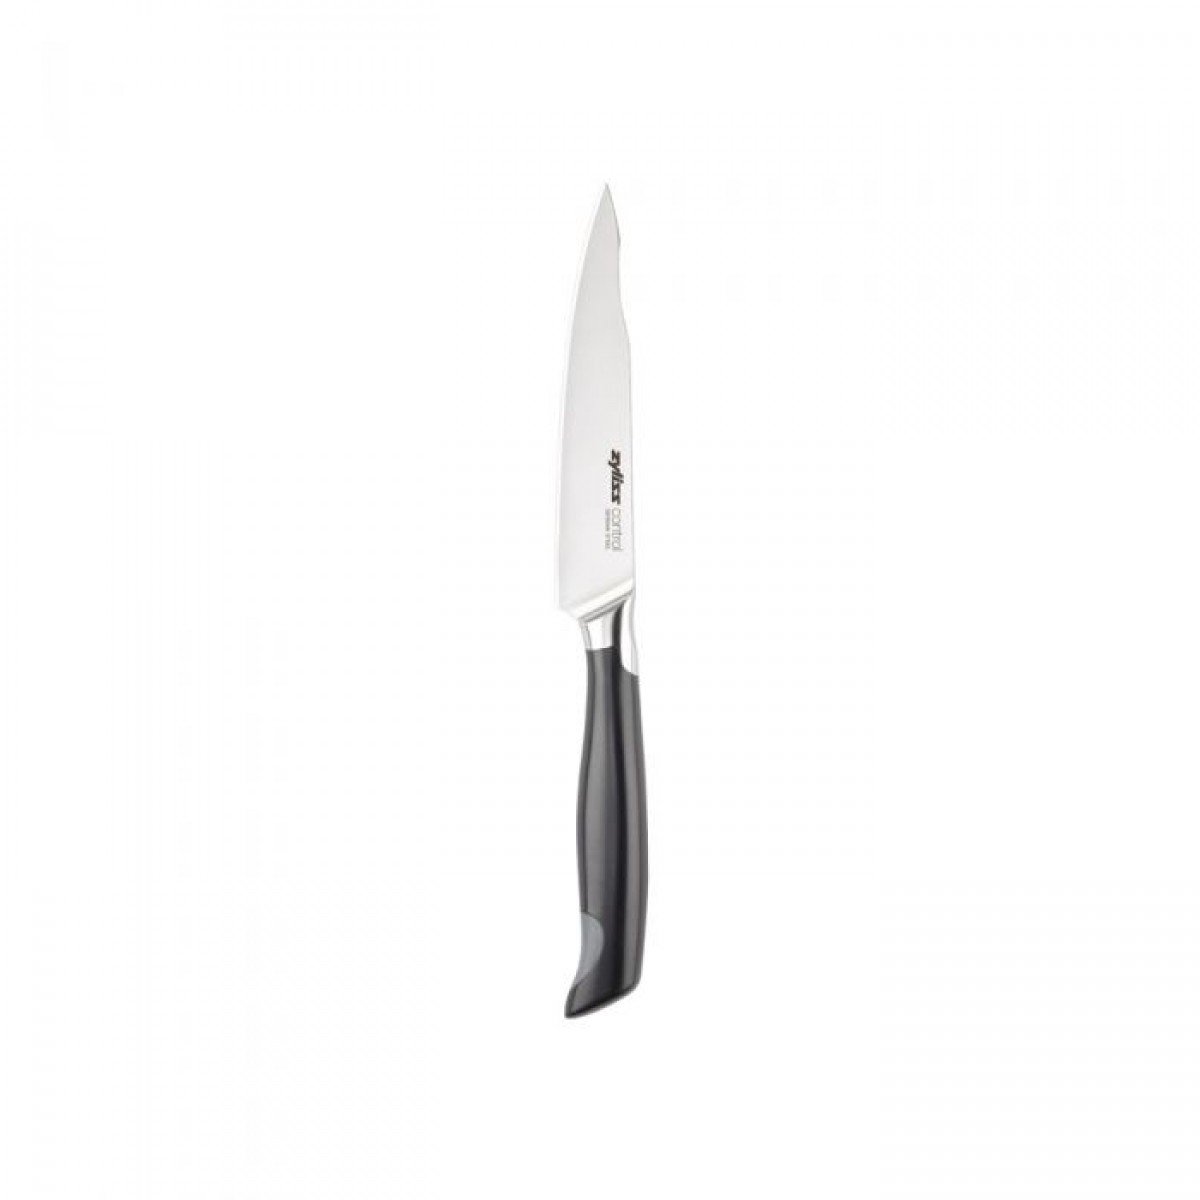 Zyliss Control Paring Knife Set - Professional Kitchen Cutlery